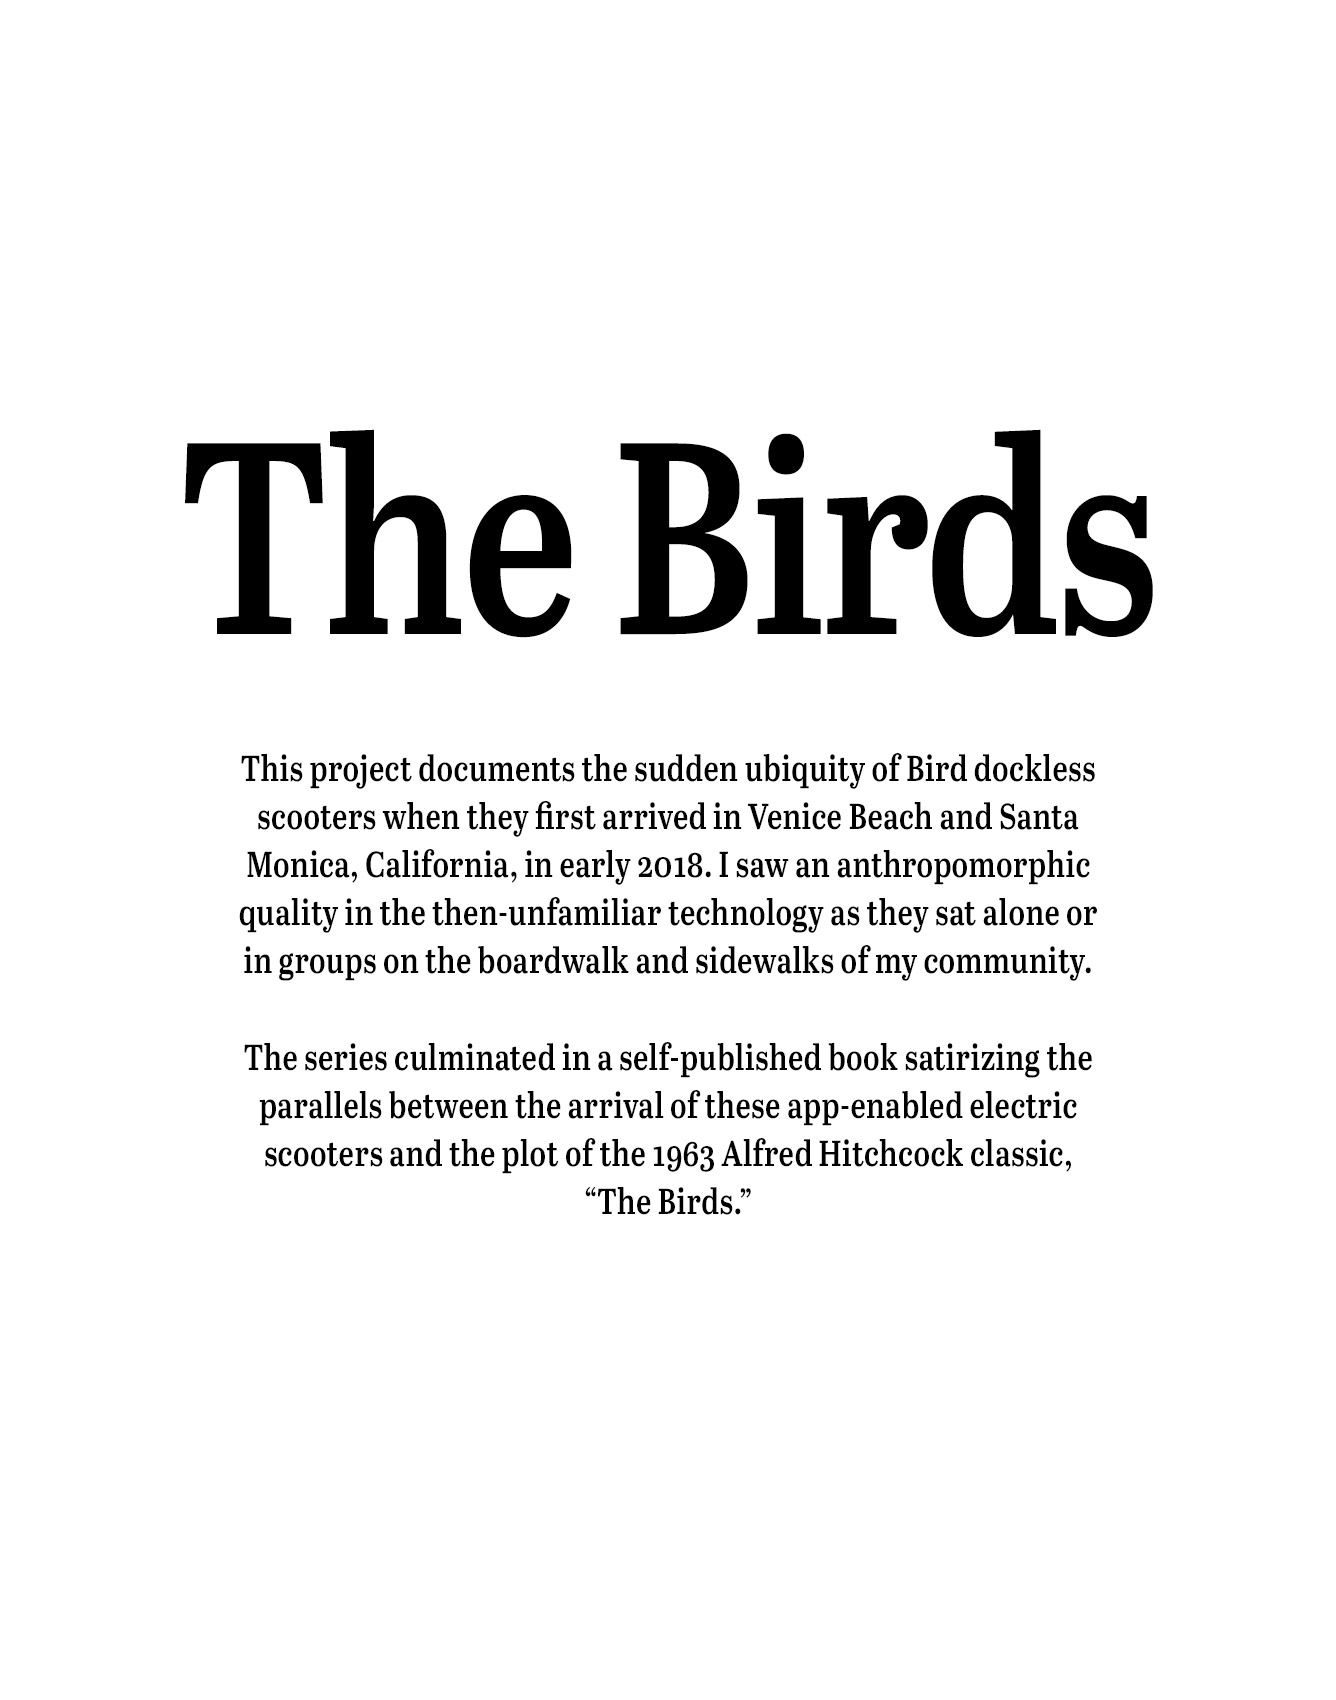 birds_title_page